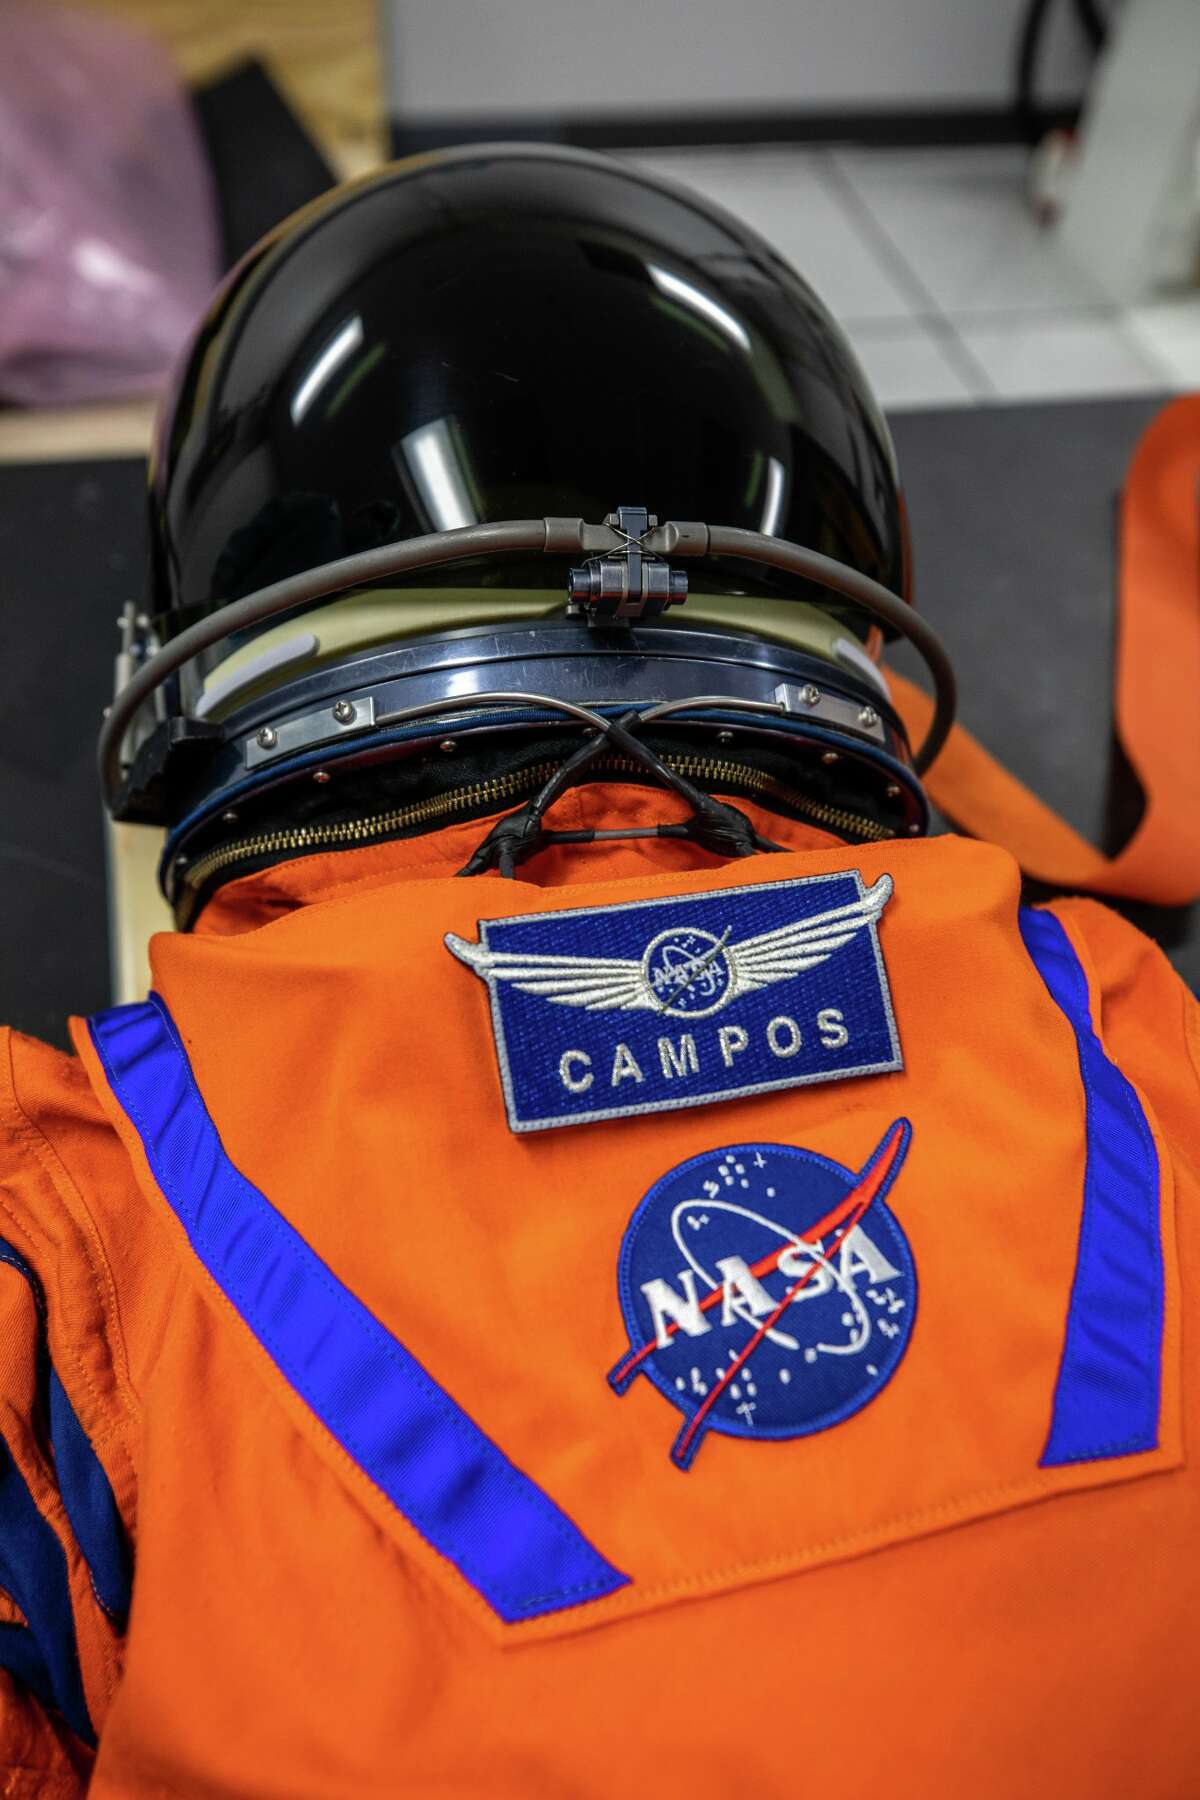 Pictured is NASA's “Commander Moonikin Campos,” a mannequin which is named after Laredo's Arturo Campos, who helped bring the crew of Apollo 13 home safely after a major malfunction. The moonikin will be part of the Artemis I mission, collecting data for Artemis II, which will be the first crewed mission around the moon in over 50 years.